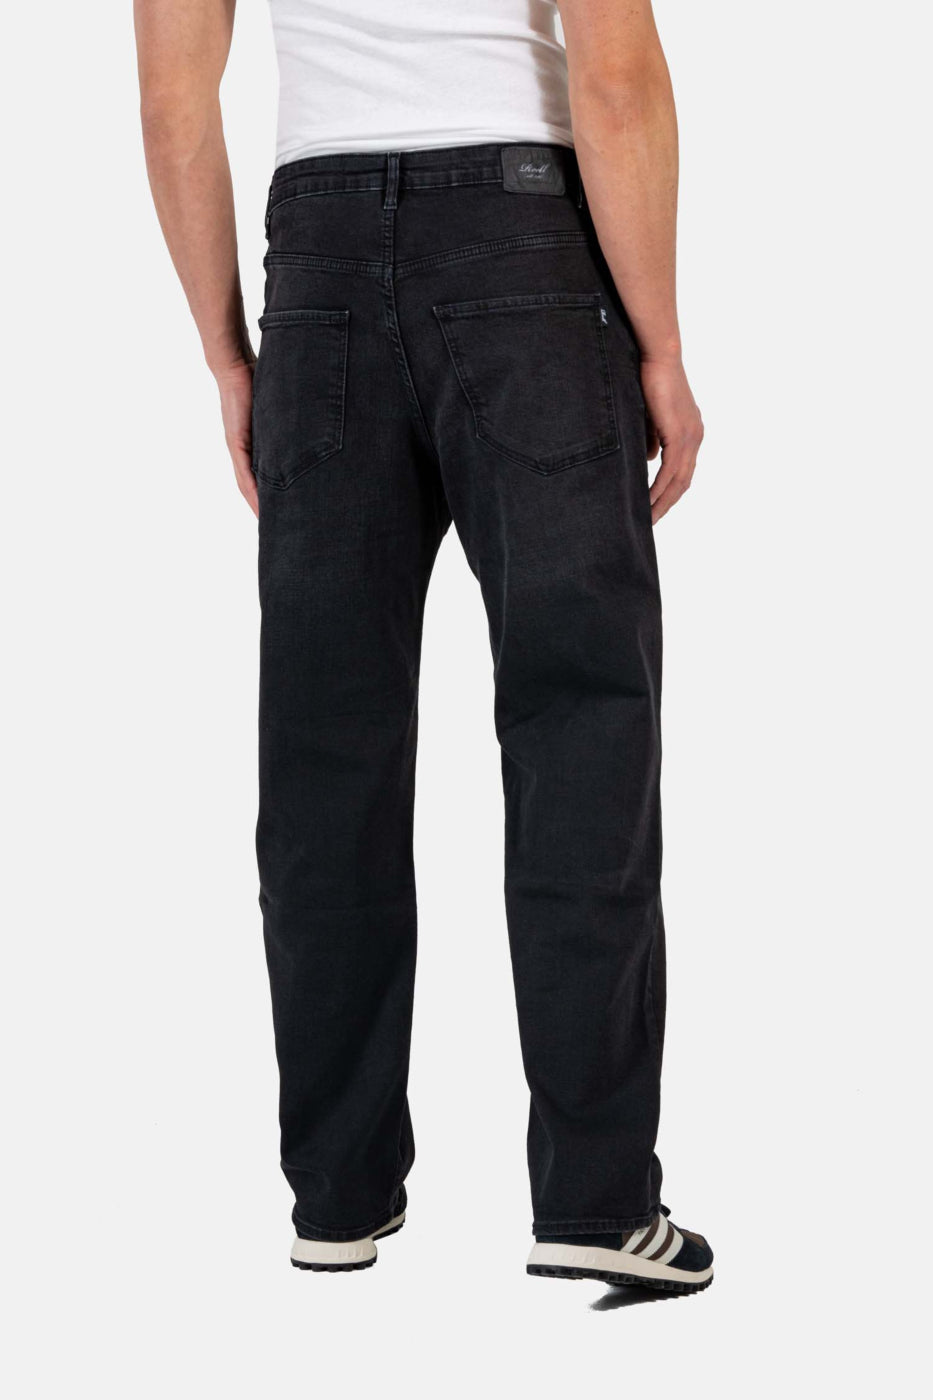 Reell Solid Jeans - Black Wash